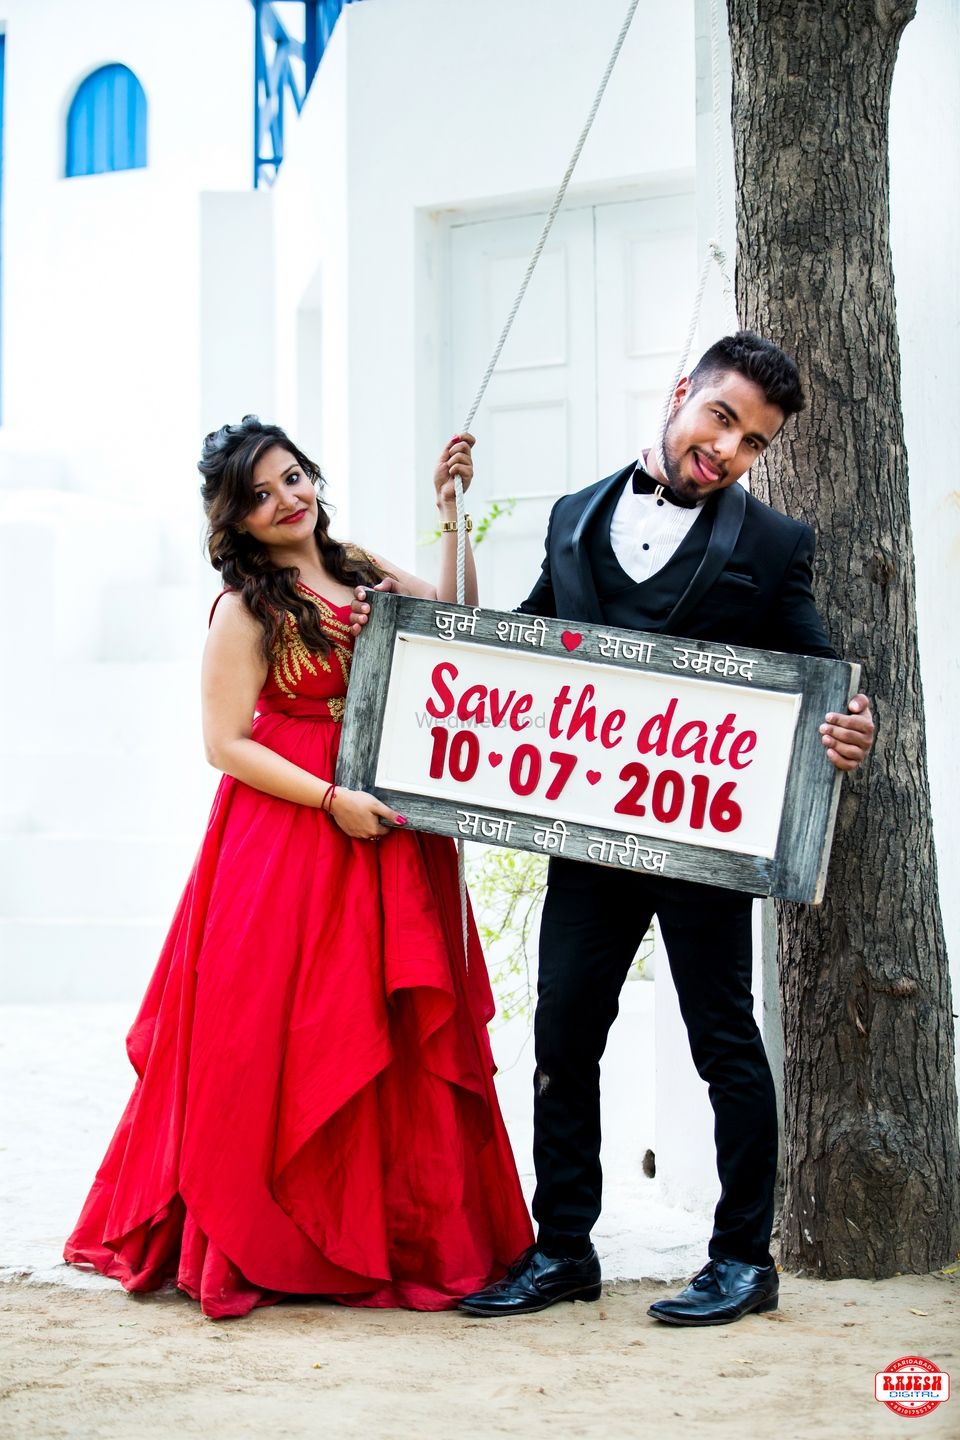 Photo of Funny Save the Date Idea